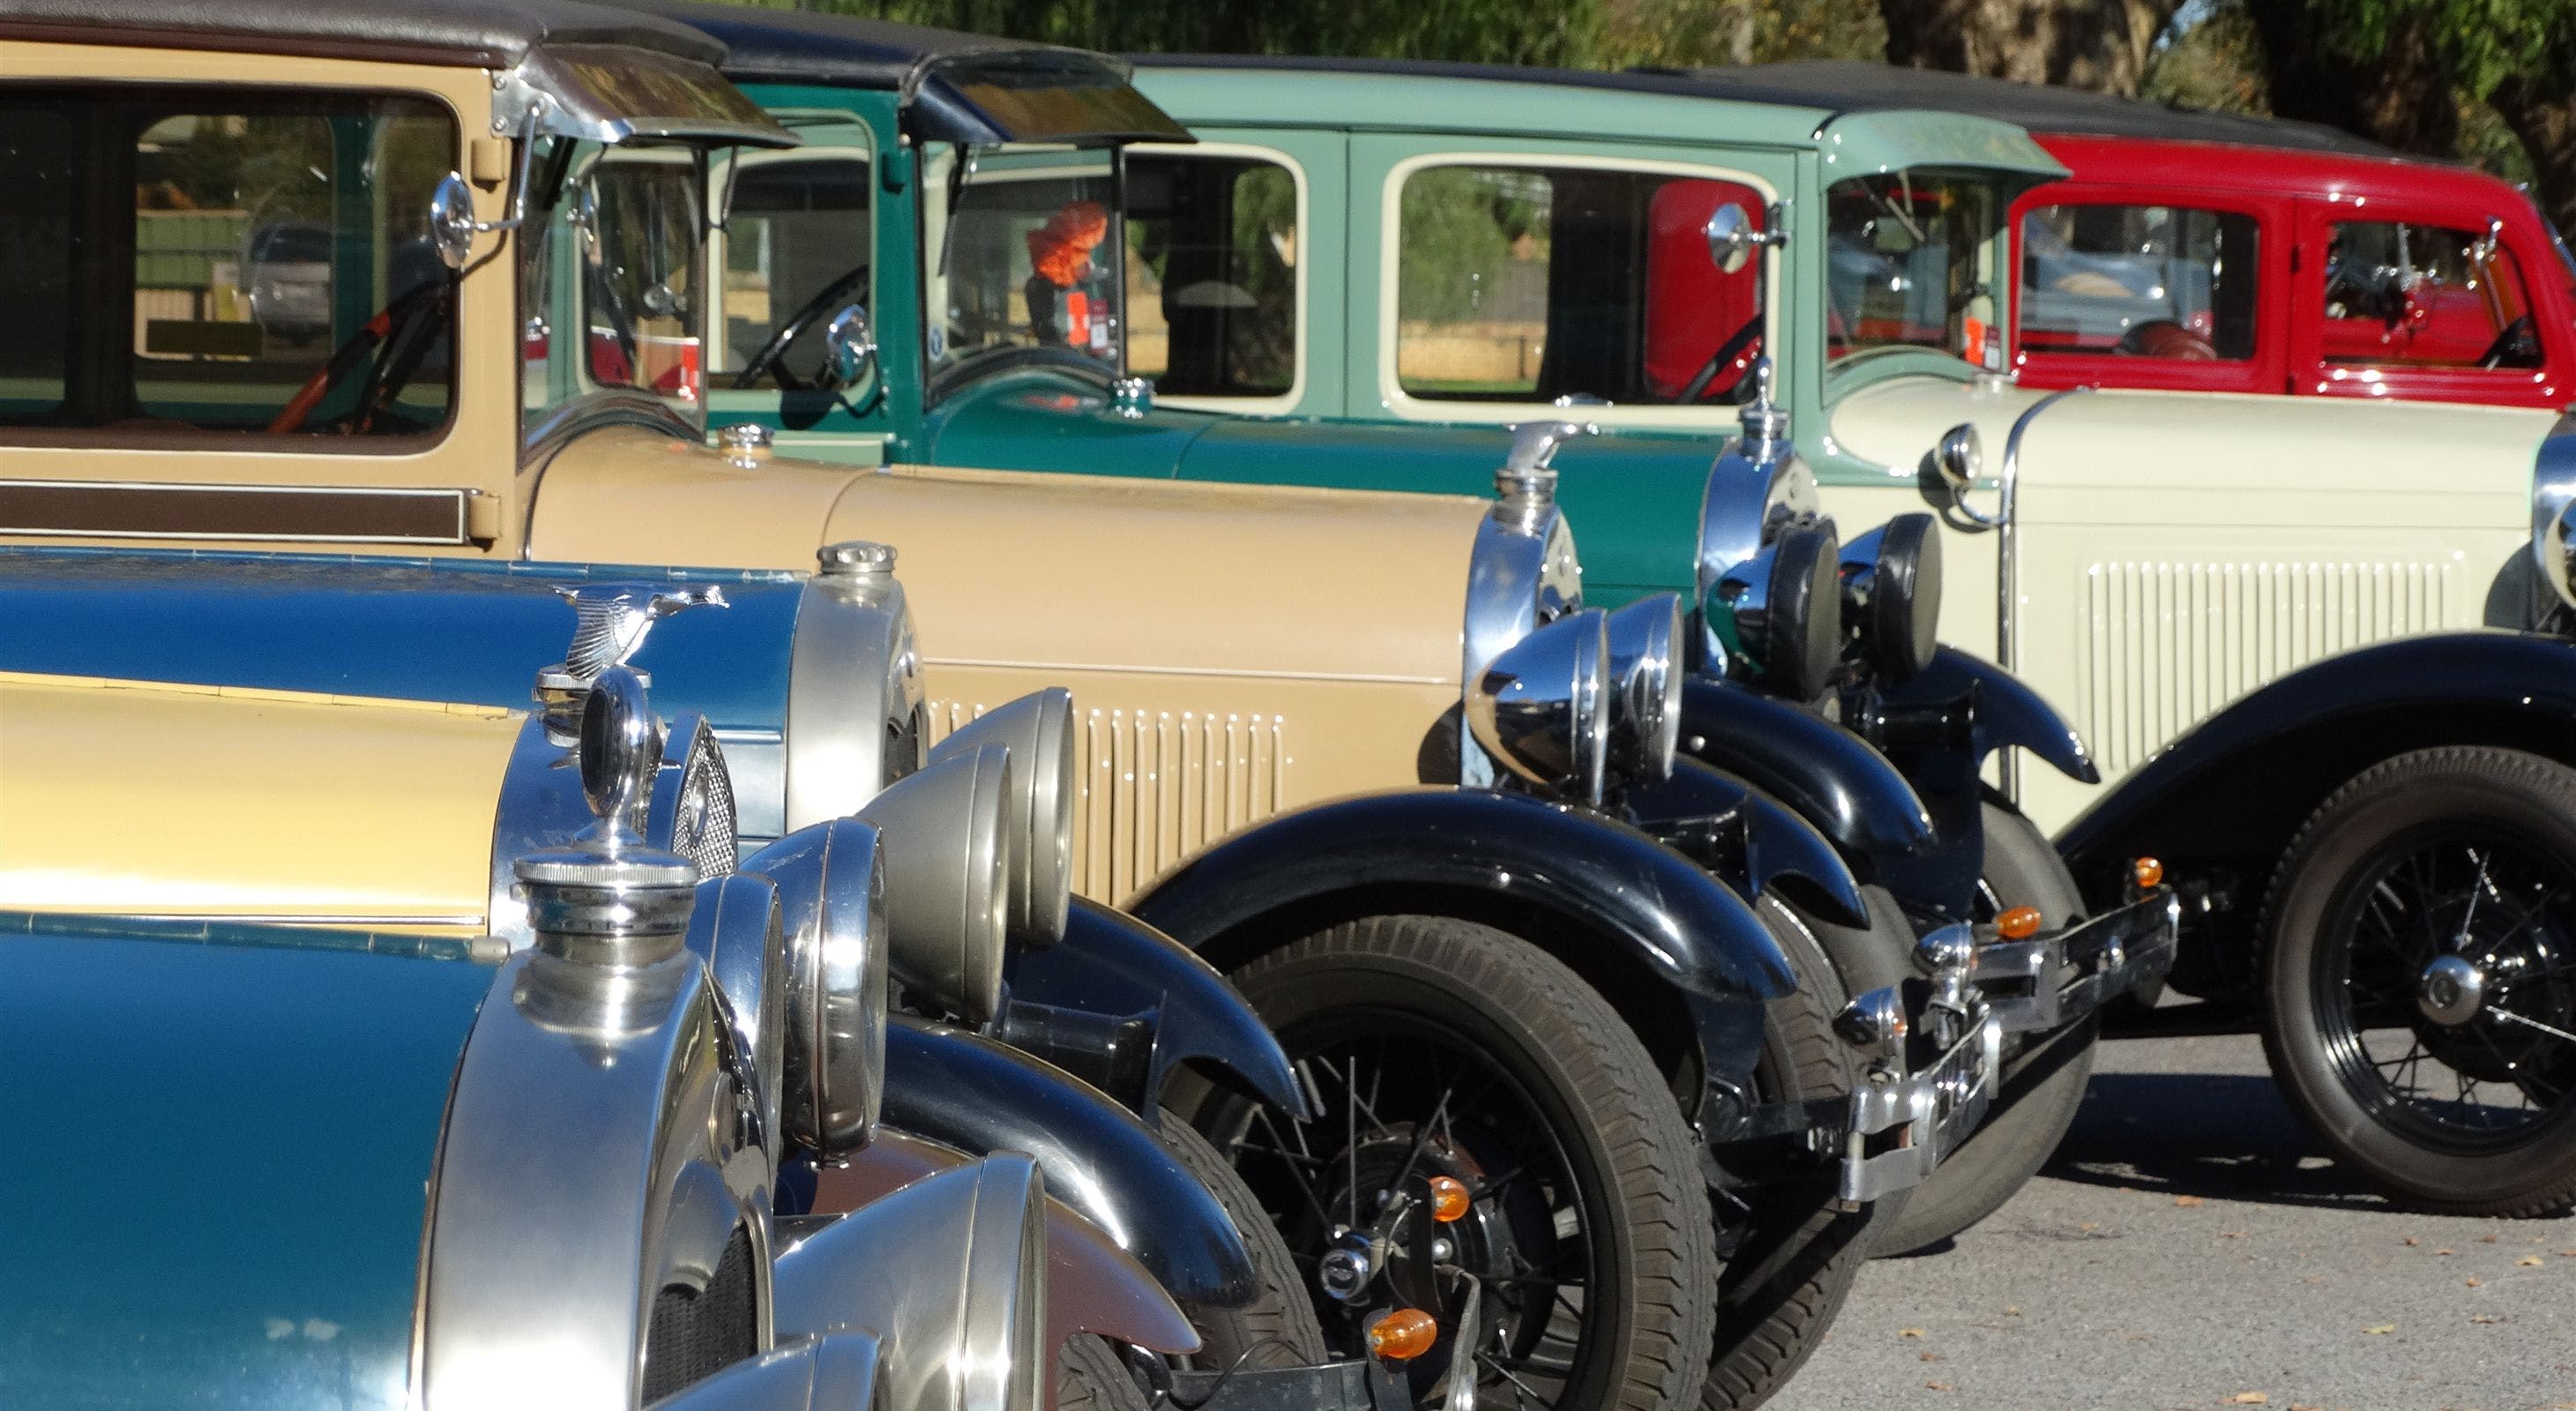 Queen's Birthday Car Rally - Accommodation Bookings